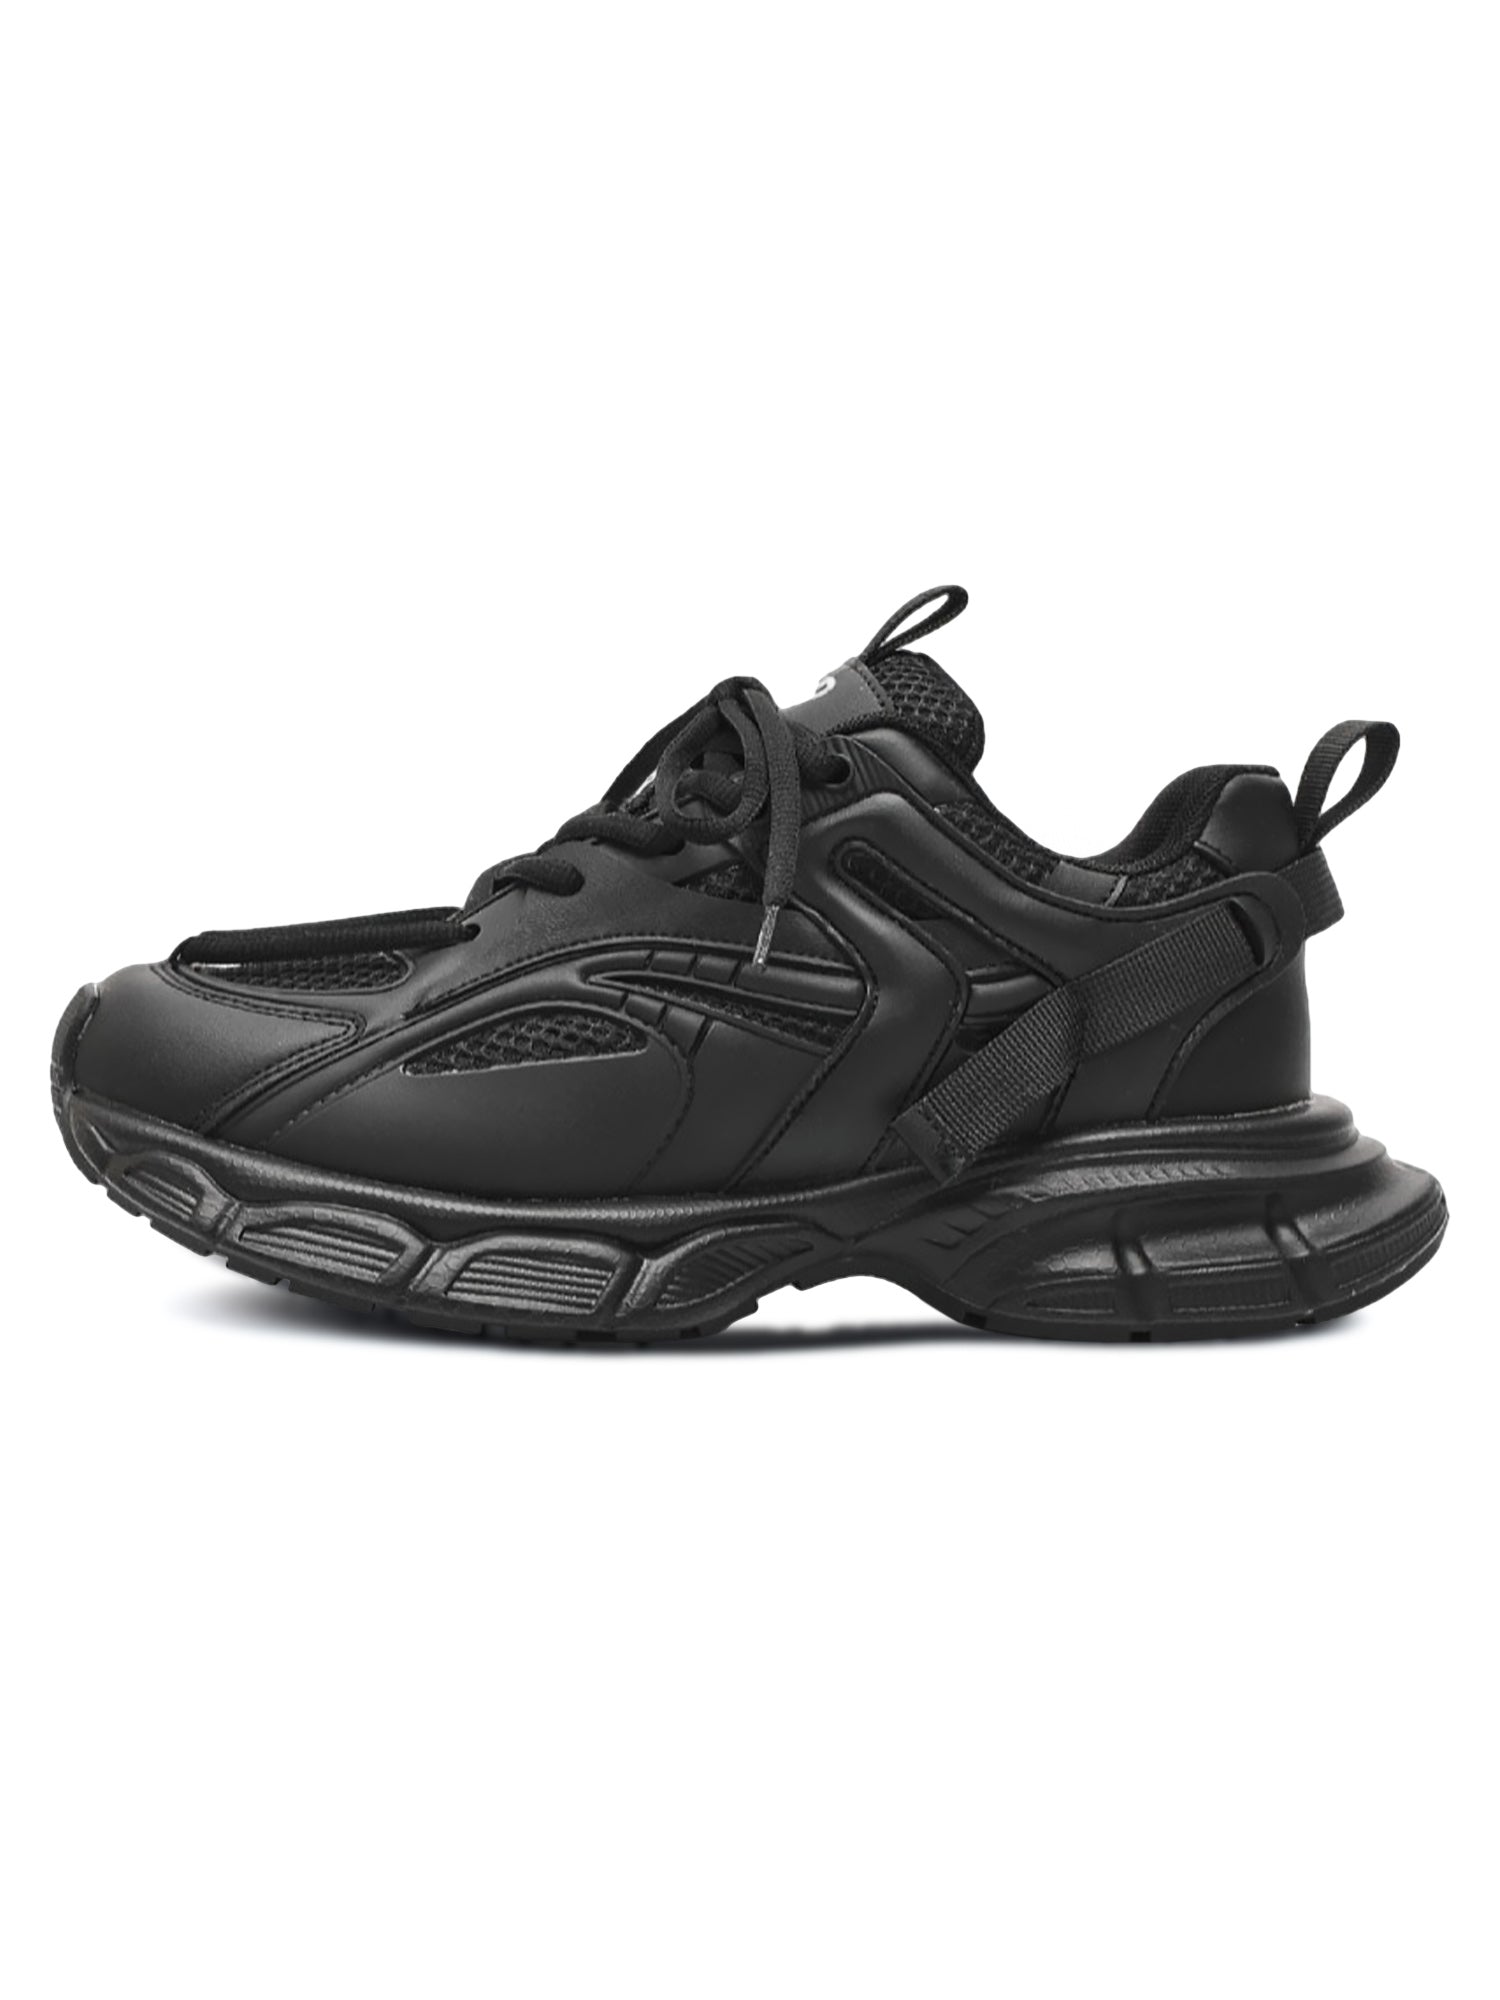 Thesupermade Black Warrior Mesh Breathable Casual Sports Rap Sneakers - 2087